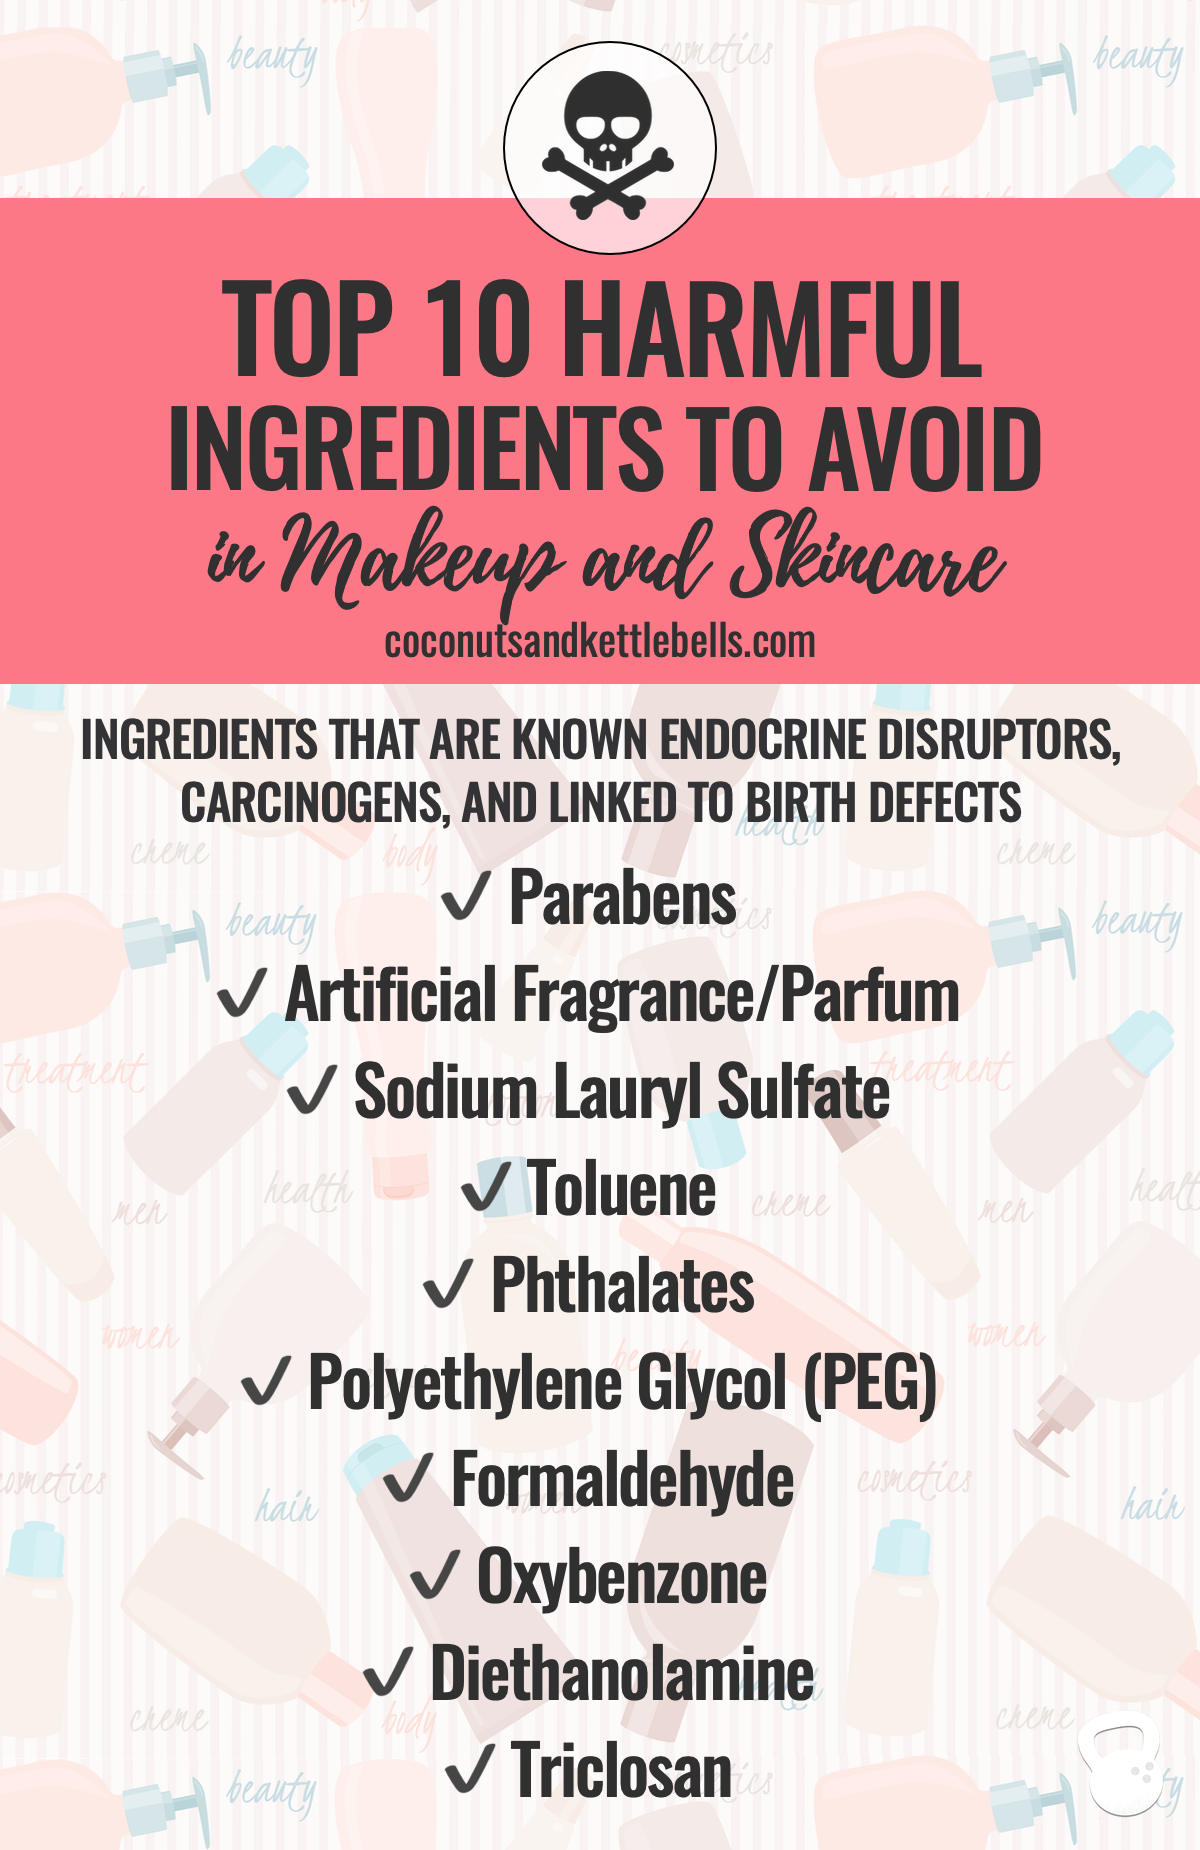 10 Harmful Ingredients to Avoid in Makeup and Skincare Products - 10 Harmful Ingredients to Avoid in Makeup and Skincare Products -   15 beauty Tips 101 ideas